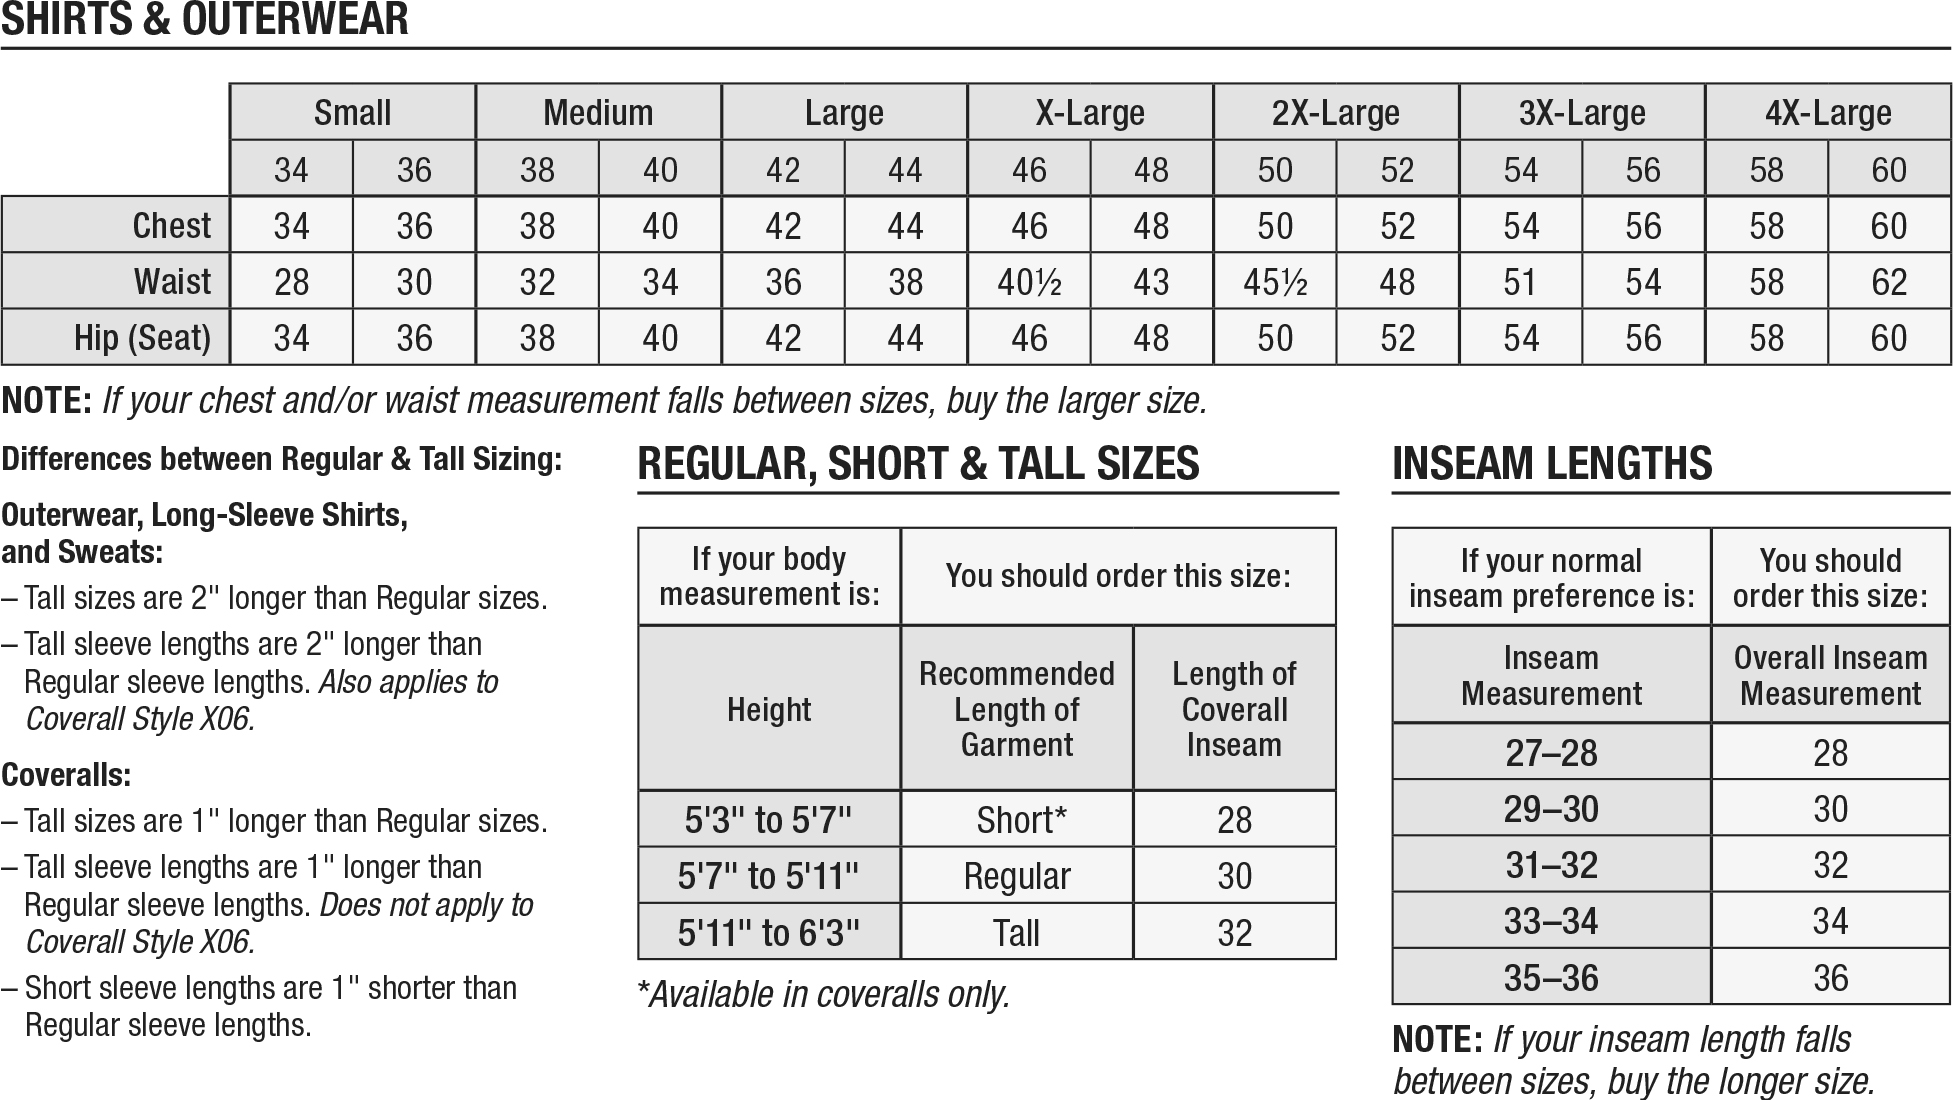 Sizing chart for Carhartt products